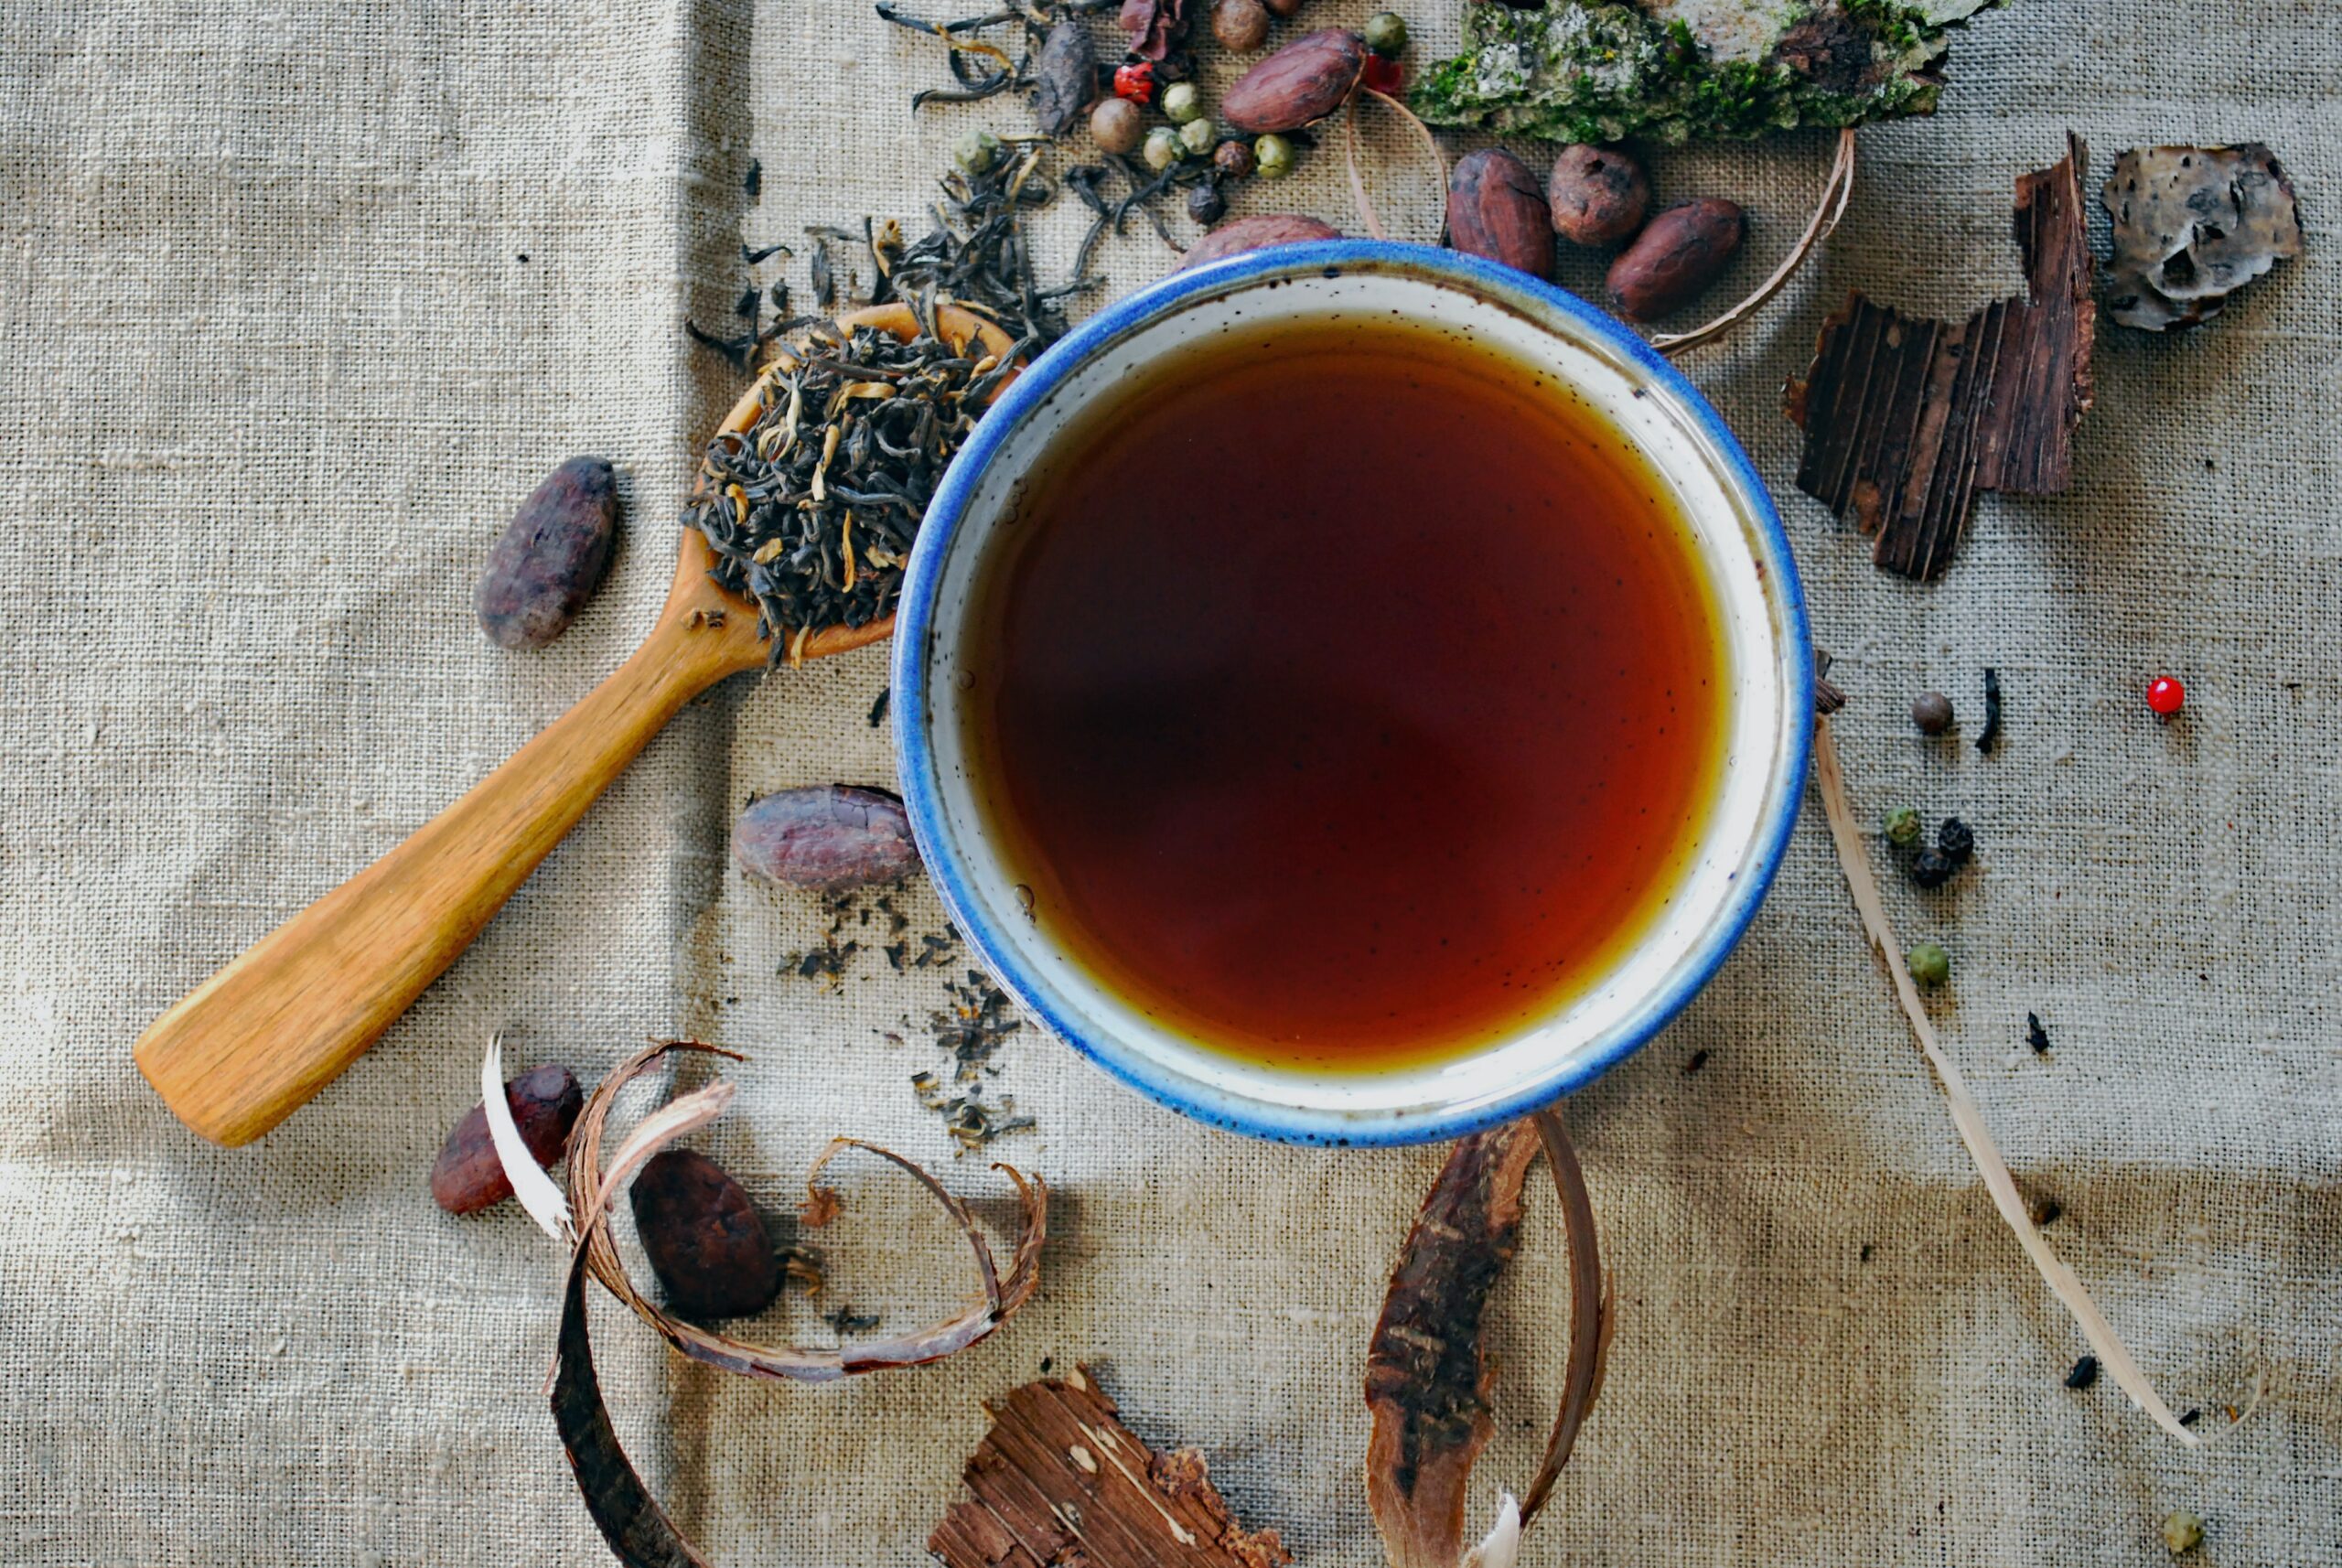 How To Choose The Right Tea For Health And Mood drew jemmett qEcWgrTG578 unsplash scaled